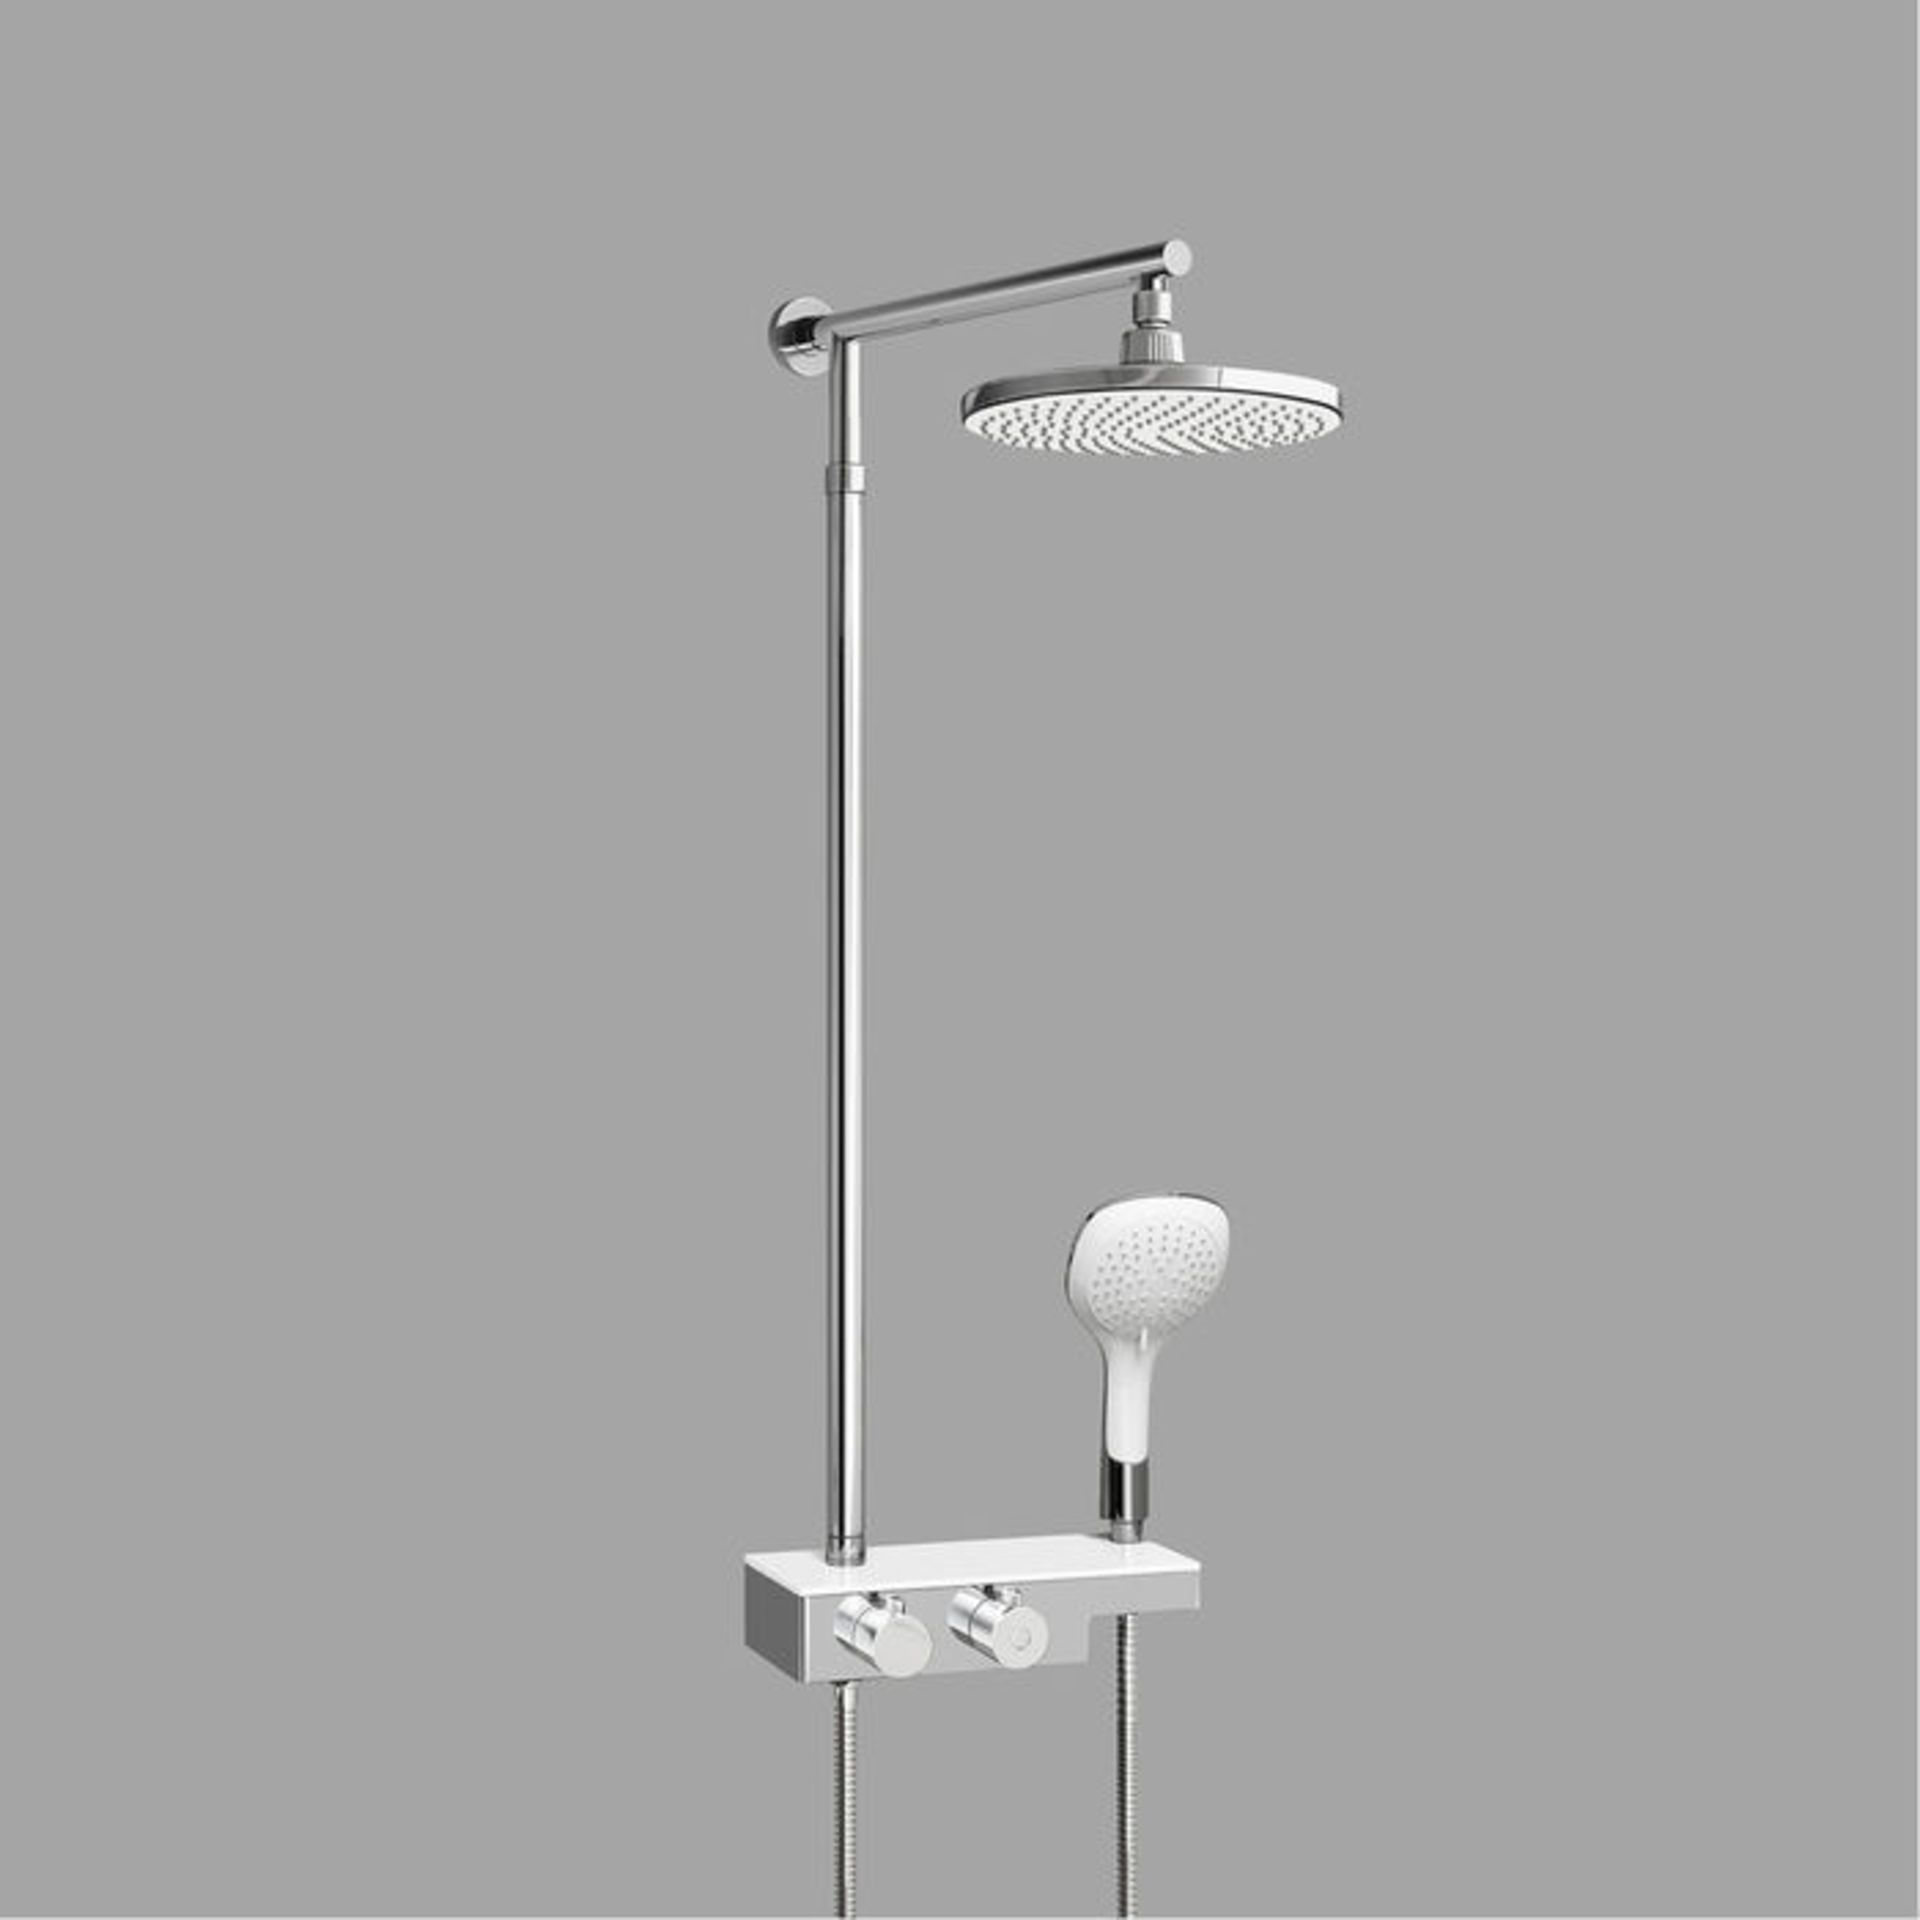 (PA182) Round Exposed Thermostatic Mixer Shower Kit Medium Head & Shelf. Cool to touch shower for - Image 2 of 3